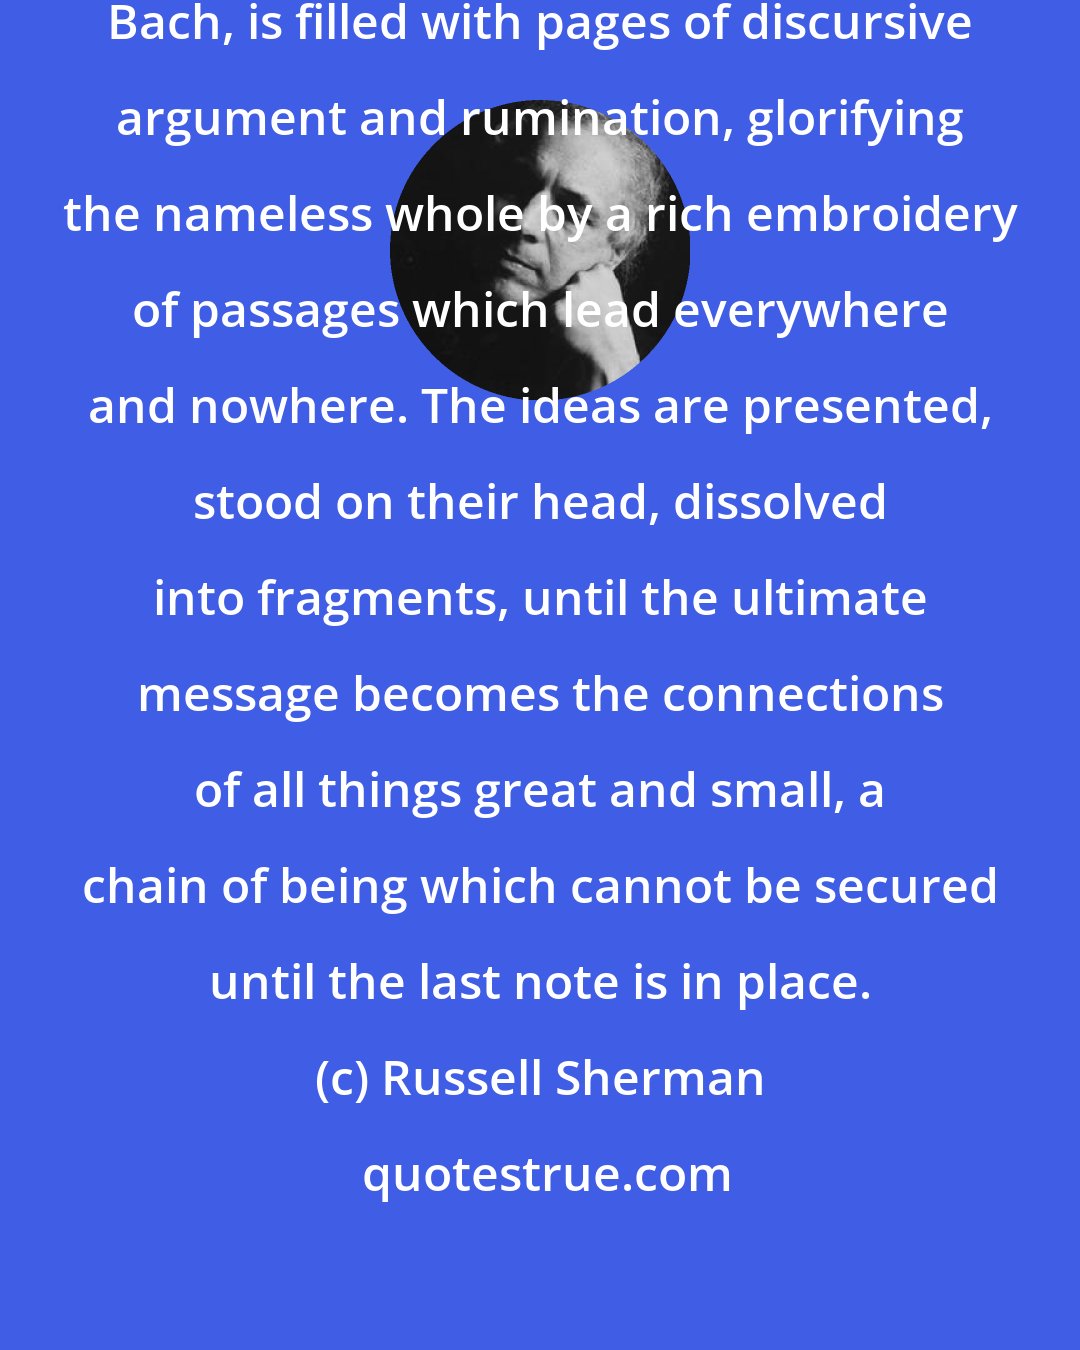 Russell Sherman: The music of the supreme architect, Bach, is filled with pages of discursive argument and rumination, glorifying the nameless whole by a rich embroidery of passages which lead everywhere and nowhere. The ideas are presented, stood on their head, dissolved into fragments, until the ultimate message becomes the connections of all things great and small, a chain of being which cannot be secured until the last note is in place.